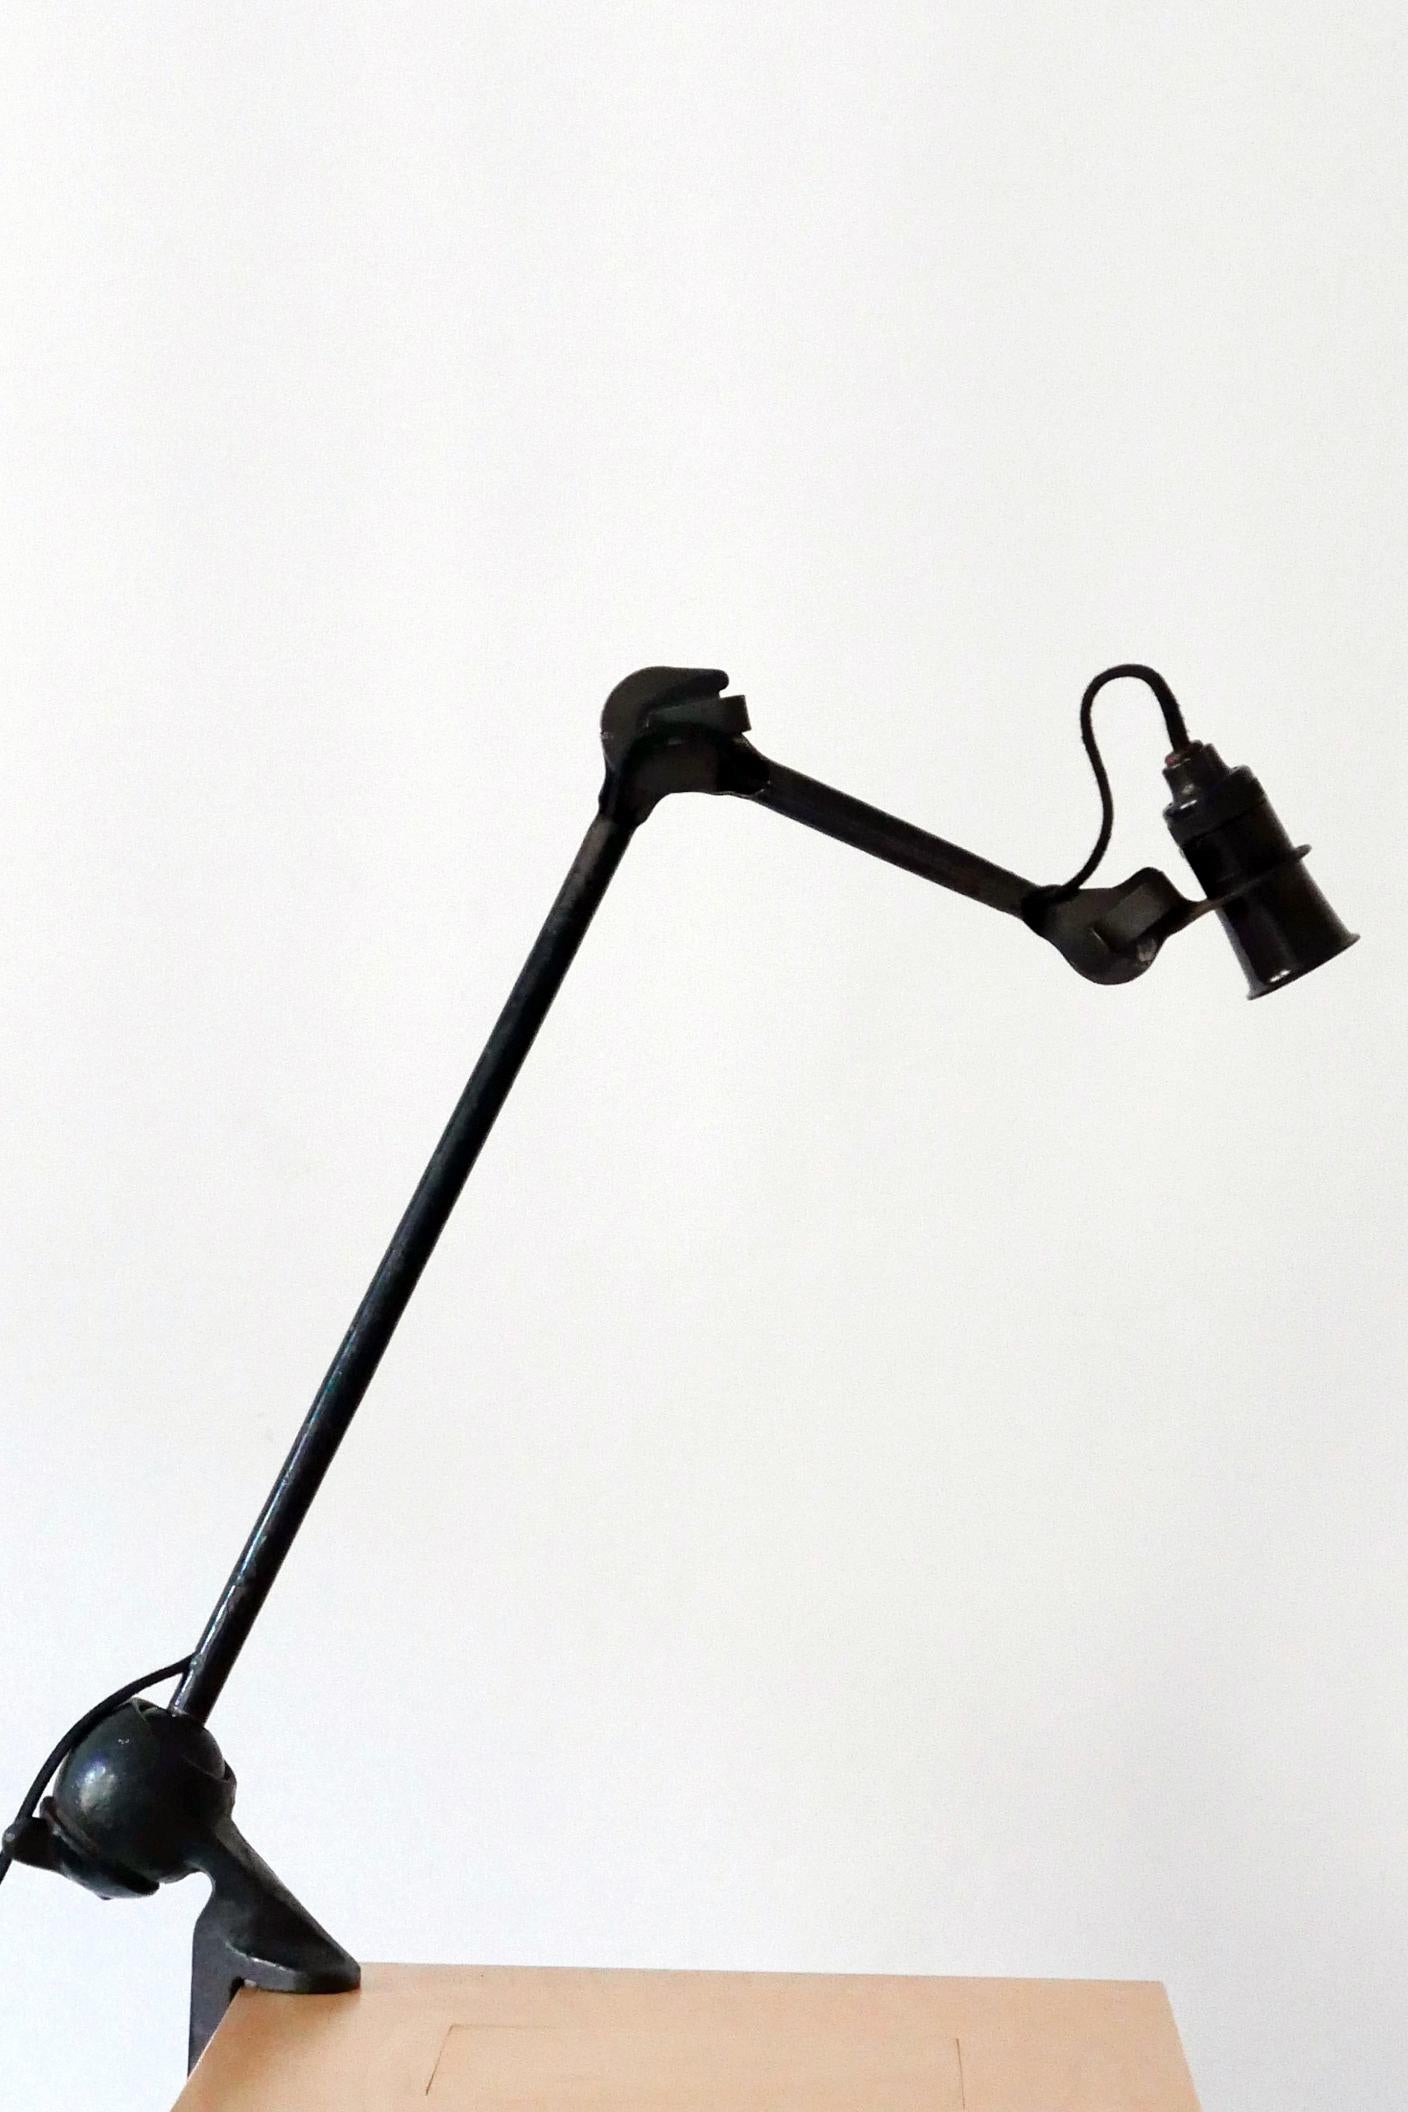 Modernist Task Light or Clamp Table Lamp by Bernard-Albin Gras for Gras, 1920s In Good Condition For Sale In Munich, DE